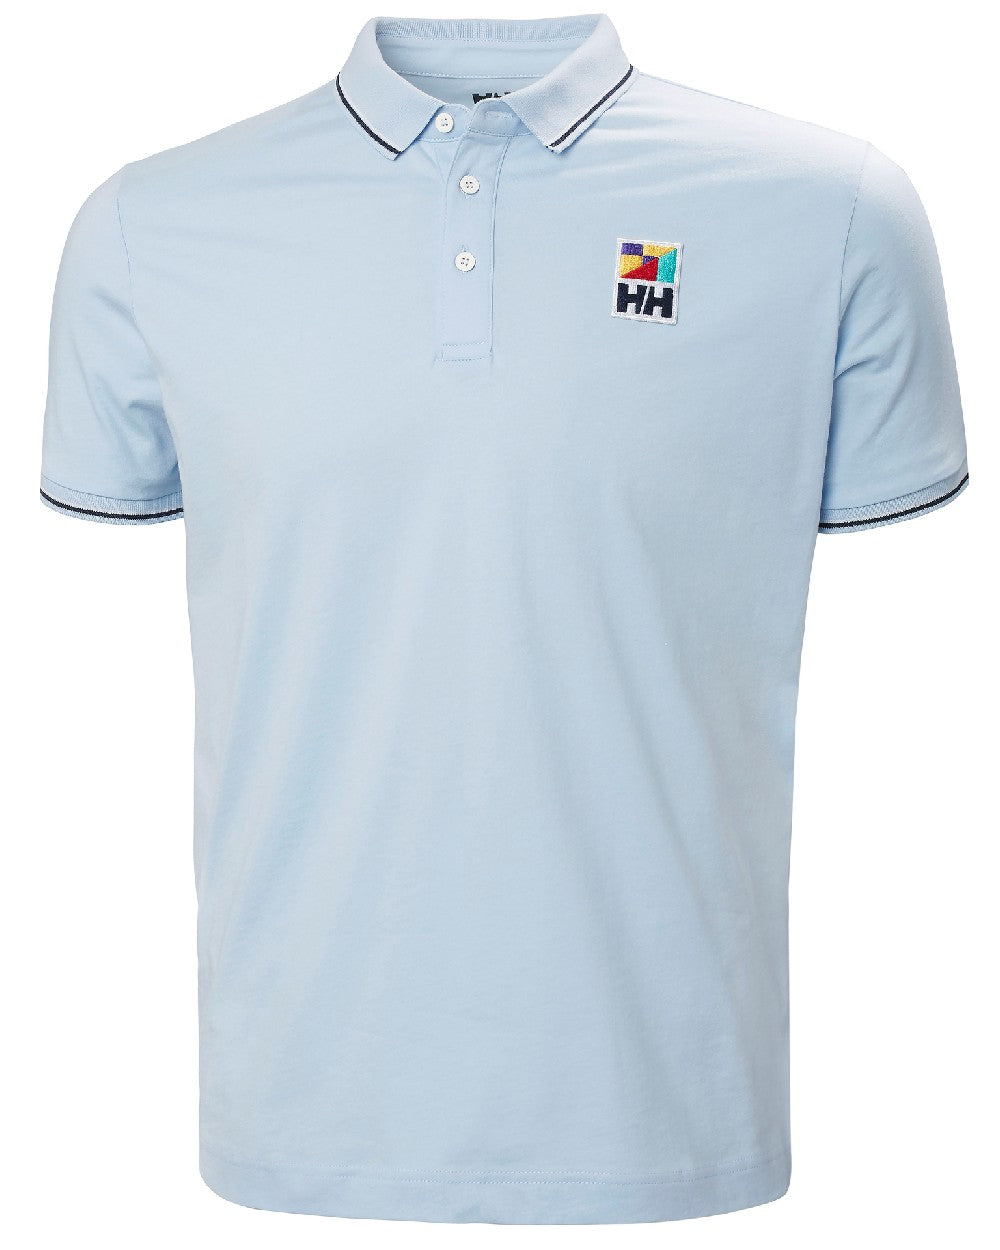 Pinnacle Blue coloured Helly Hansen Mens Jersey Polo Shirt on white background 